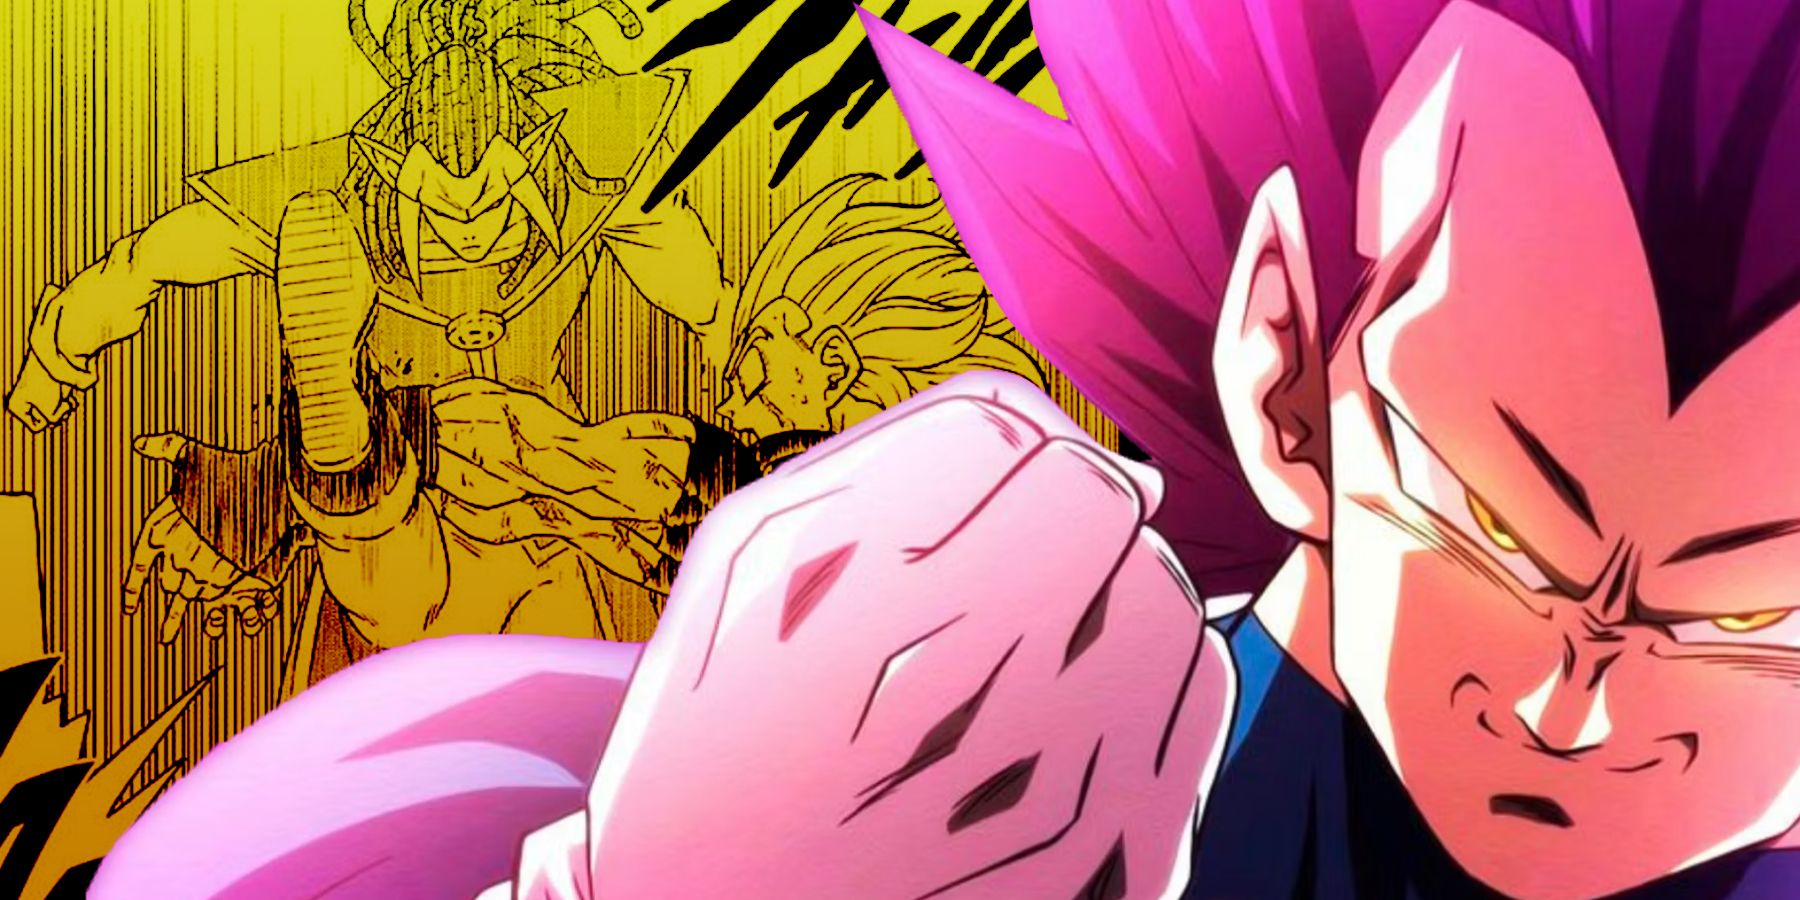 On the right, Ultra Ego form Vegeta holds up his fist. Behind him, a manga illustration shows Gas landing a hard blow on Vegeta.